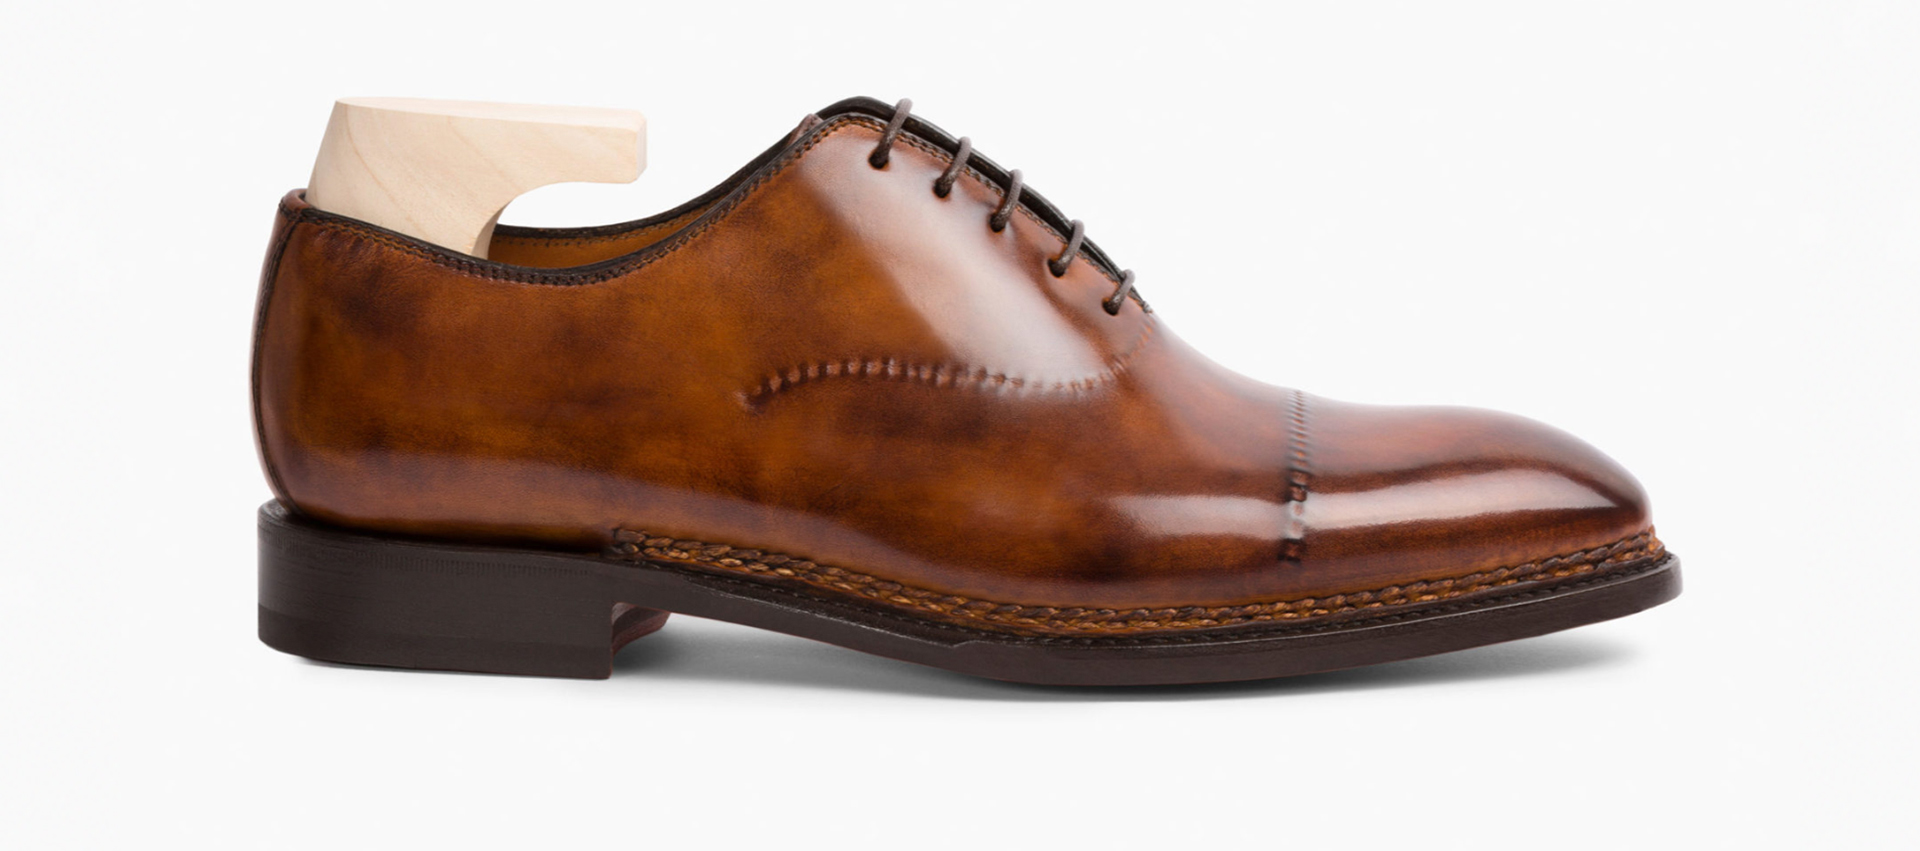 Home Page - Bontoni: Handcrafted Italian Men's Shoes